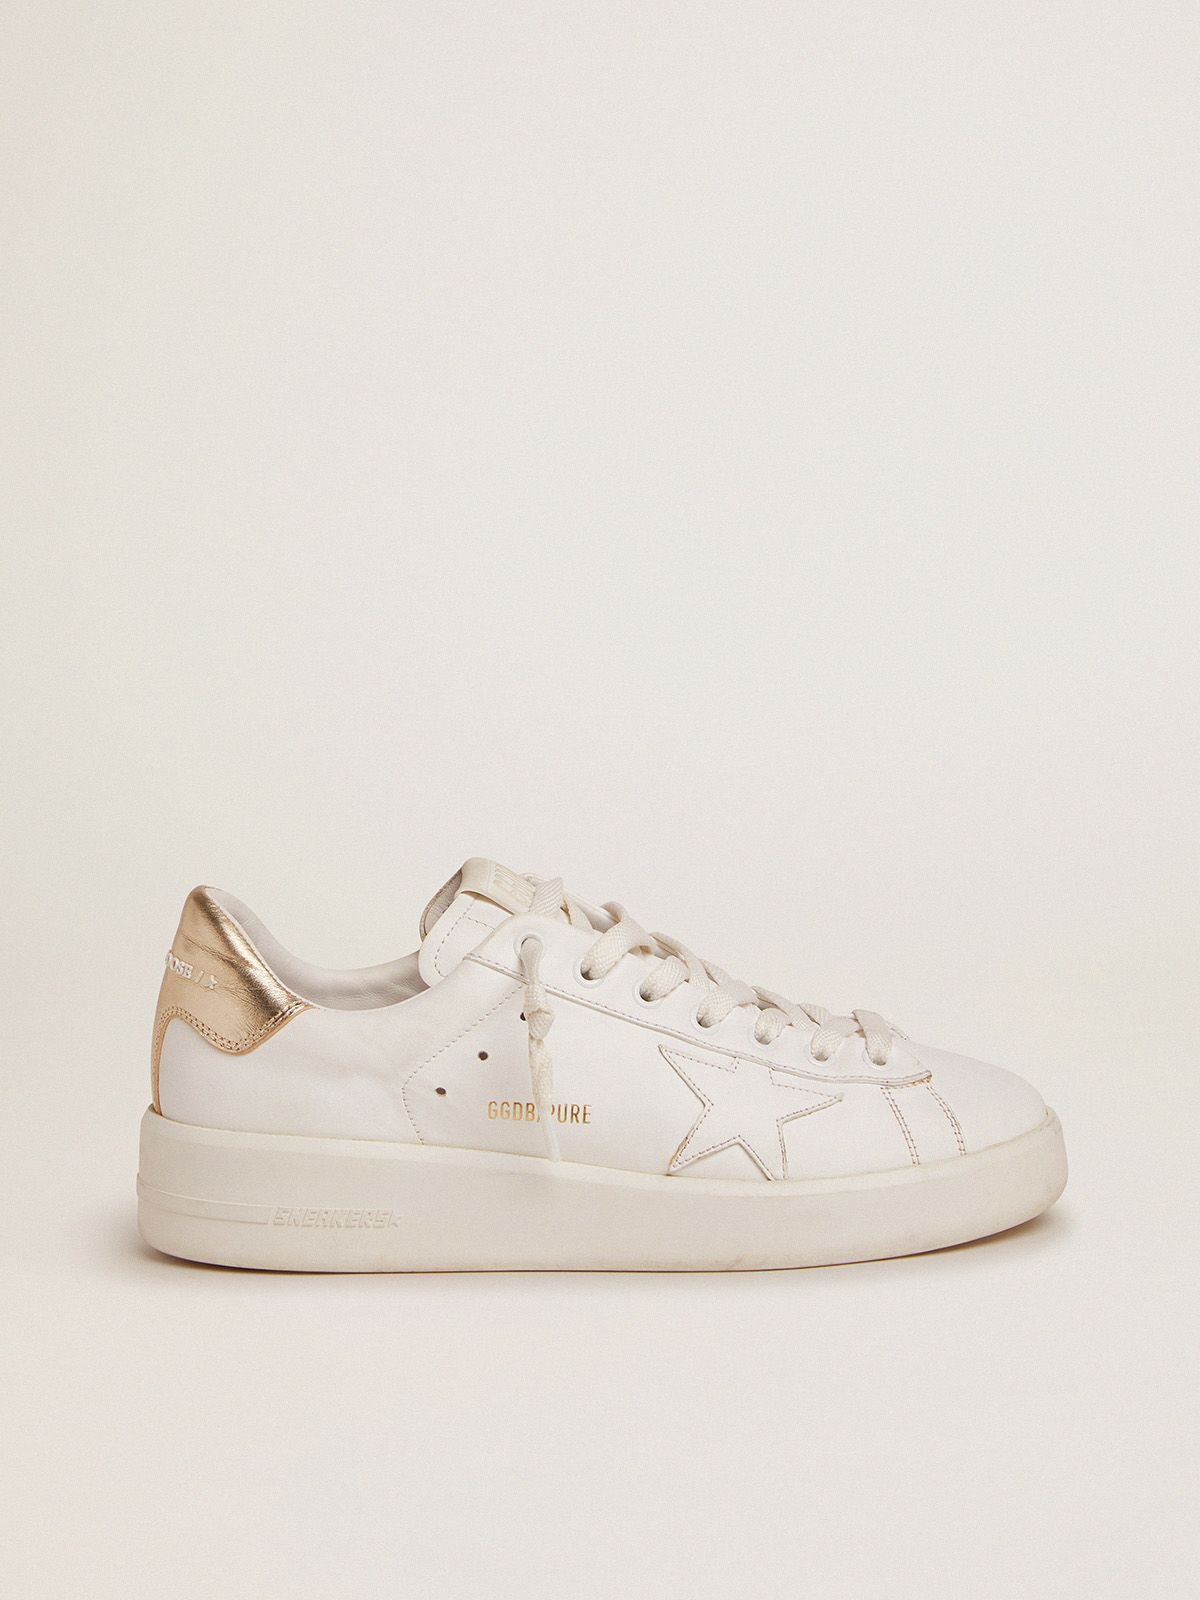 Women’s Purestar sneakers with gold-coloured heel tab | 